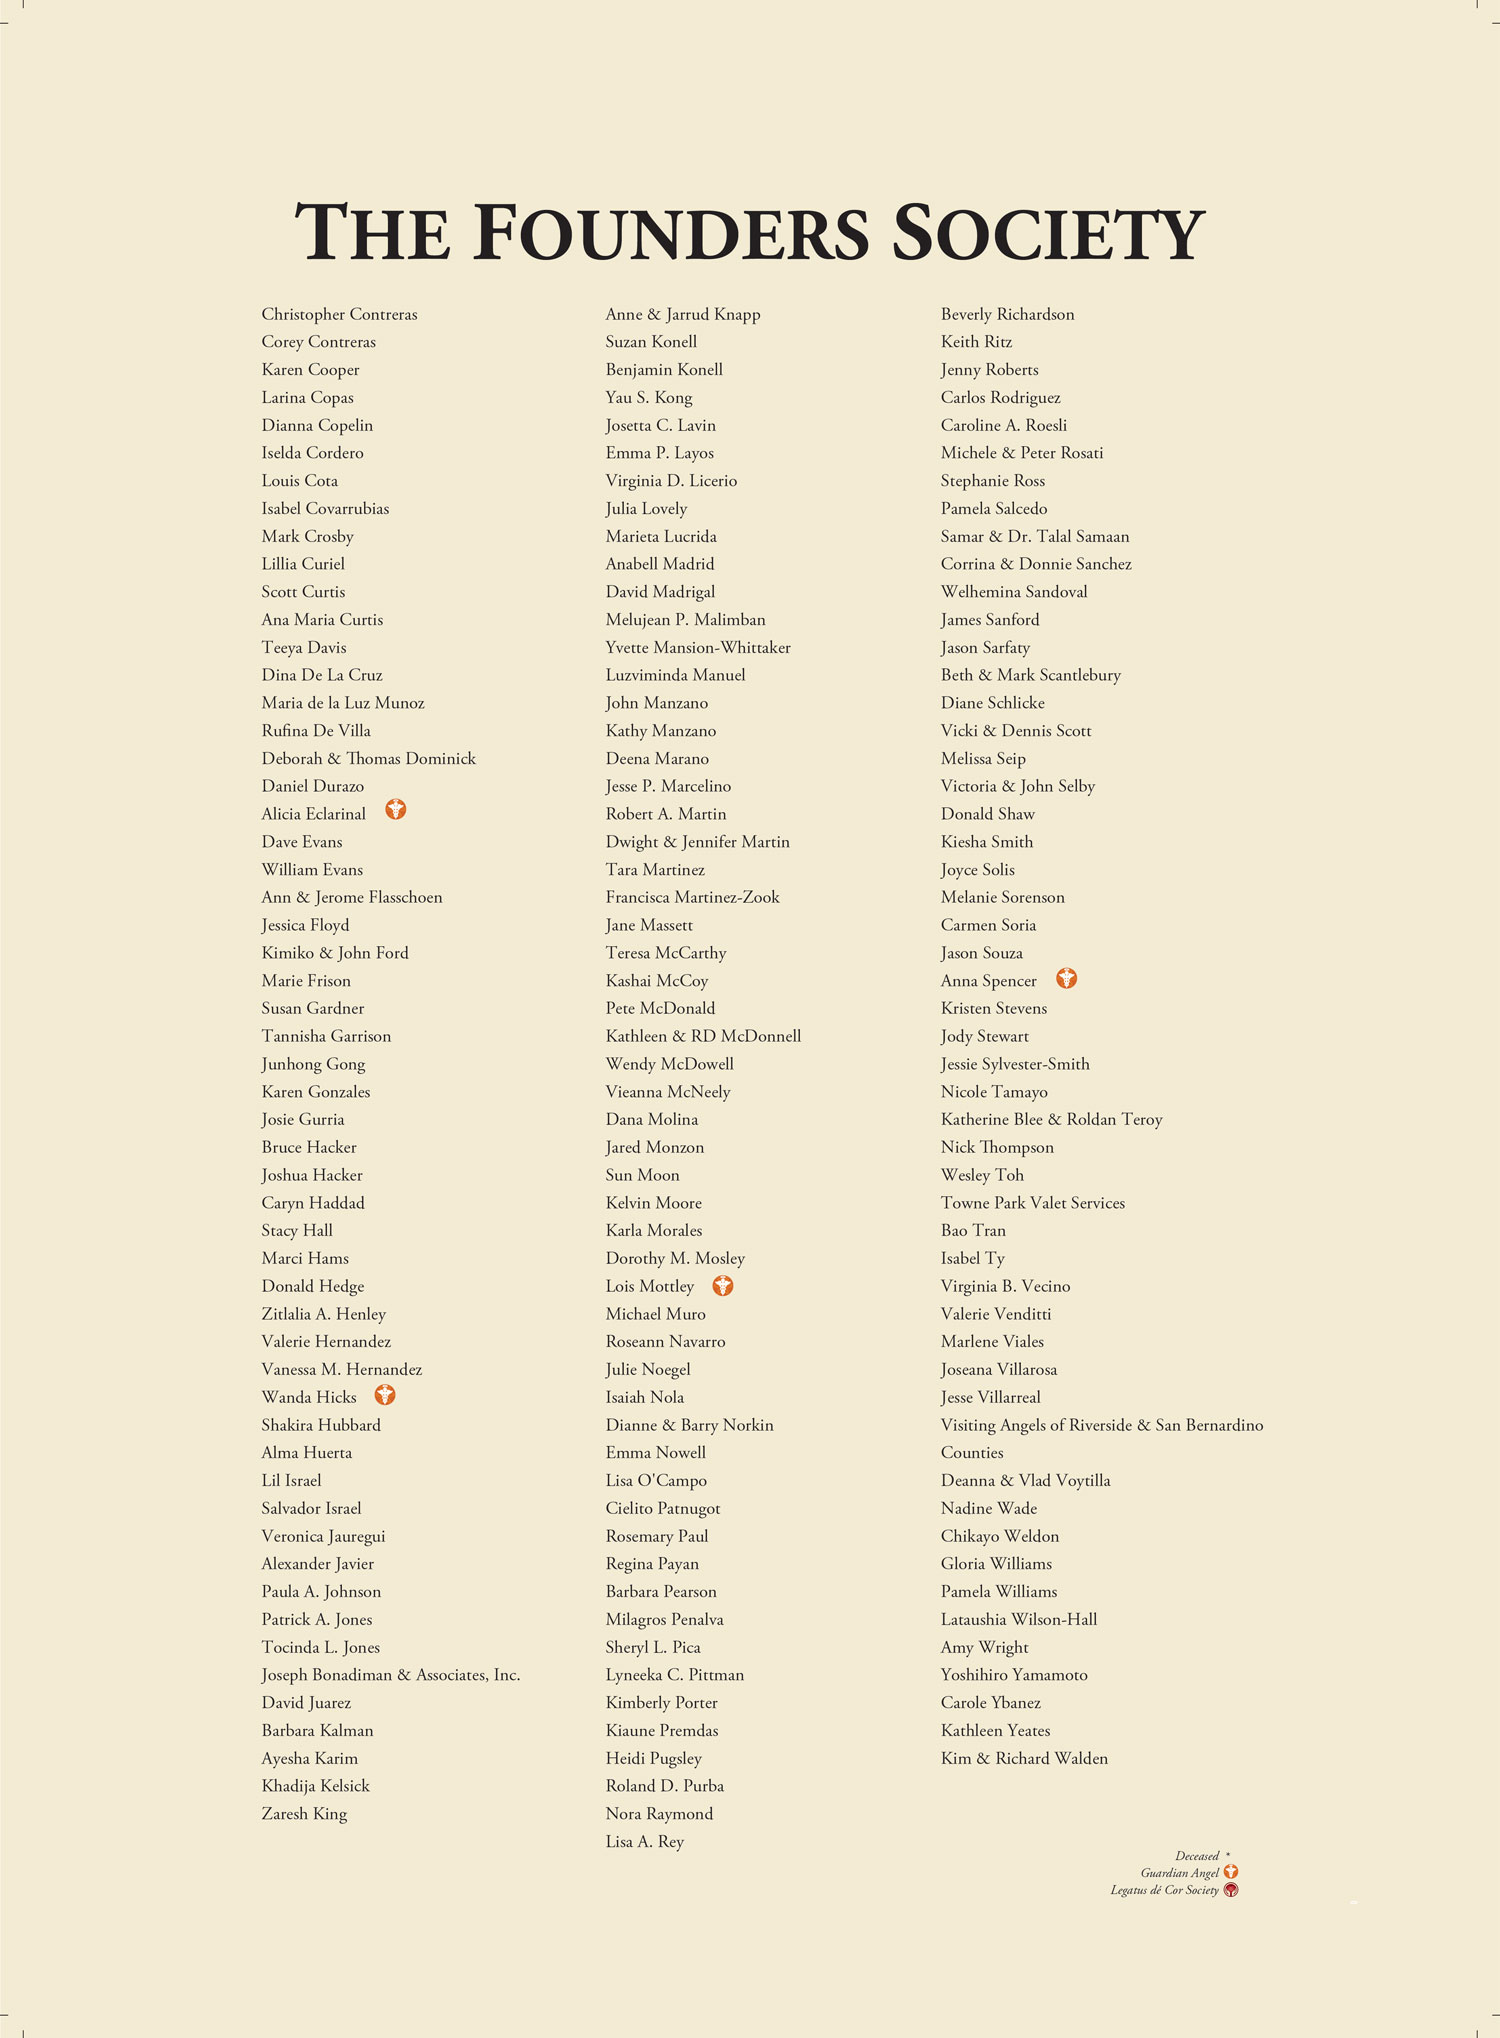 Founders Society List of Names